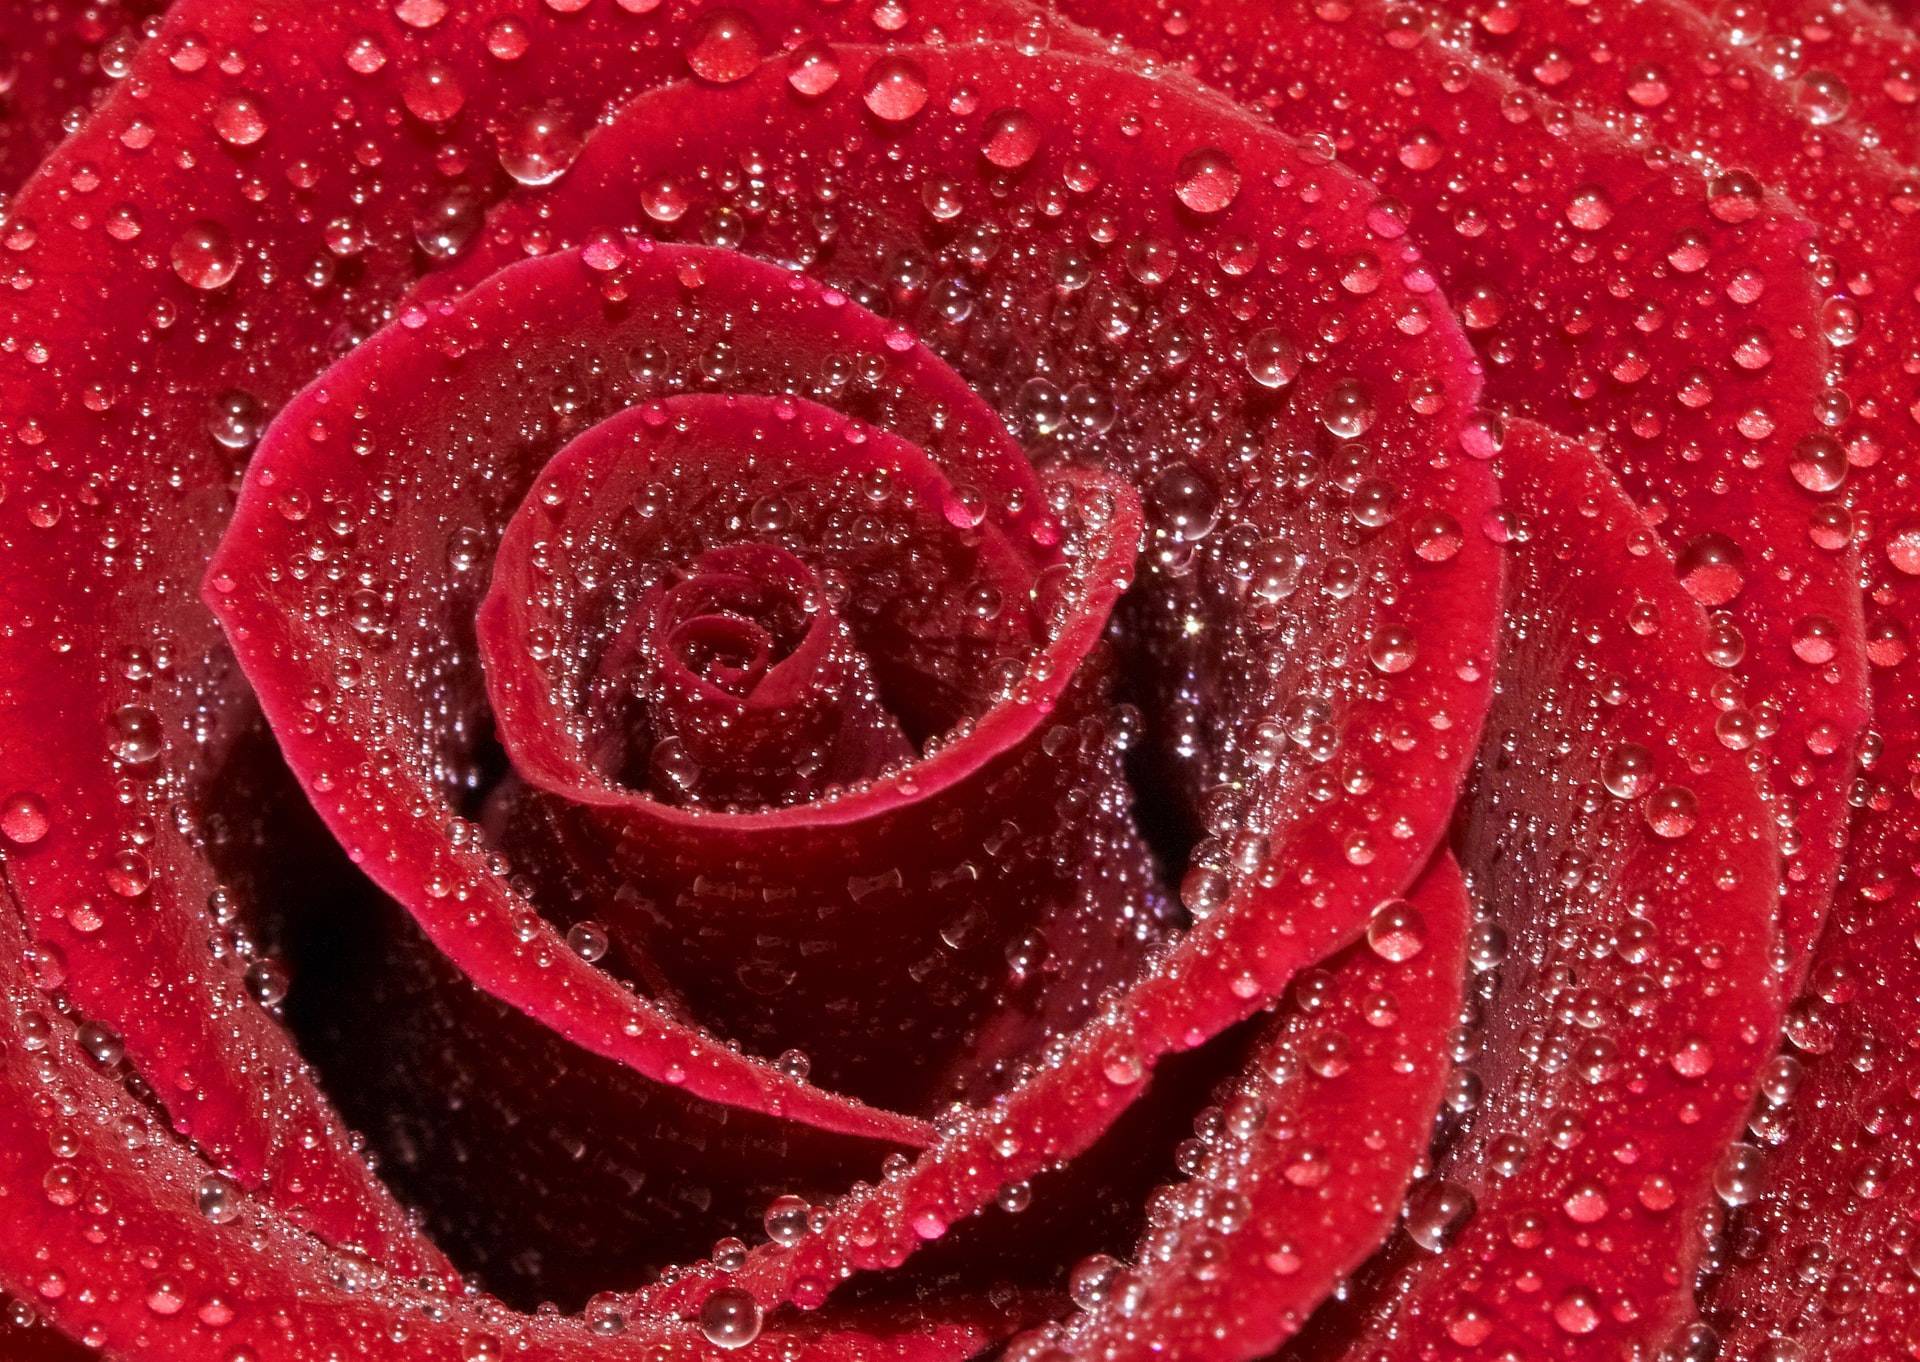 Rose with big droplets.